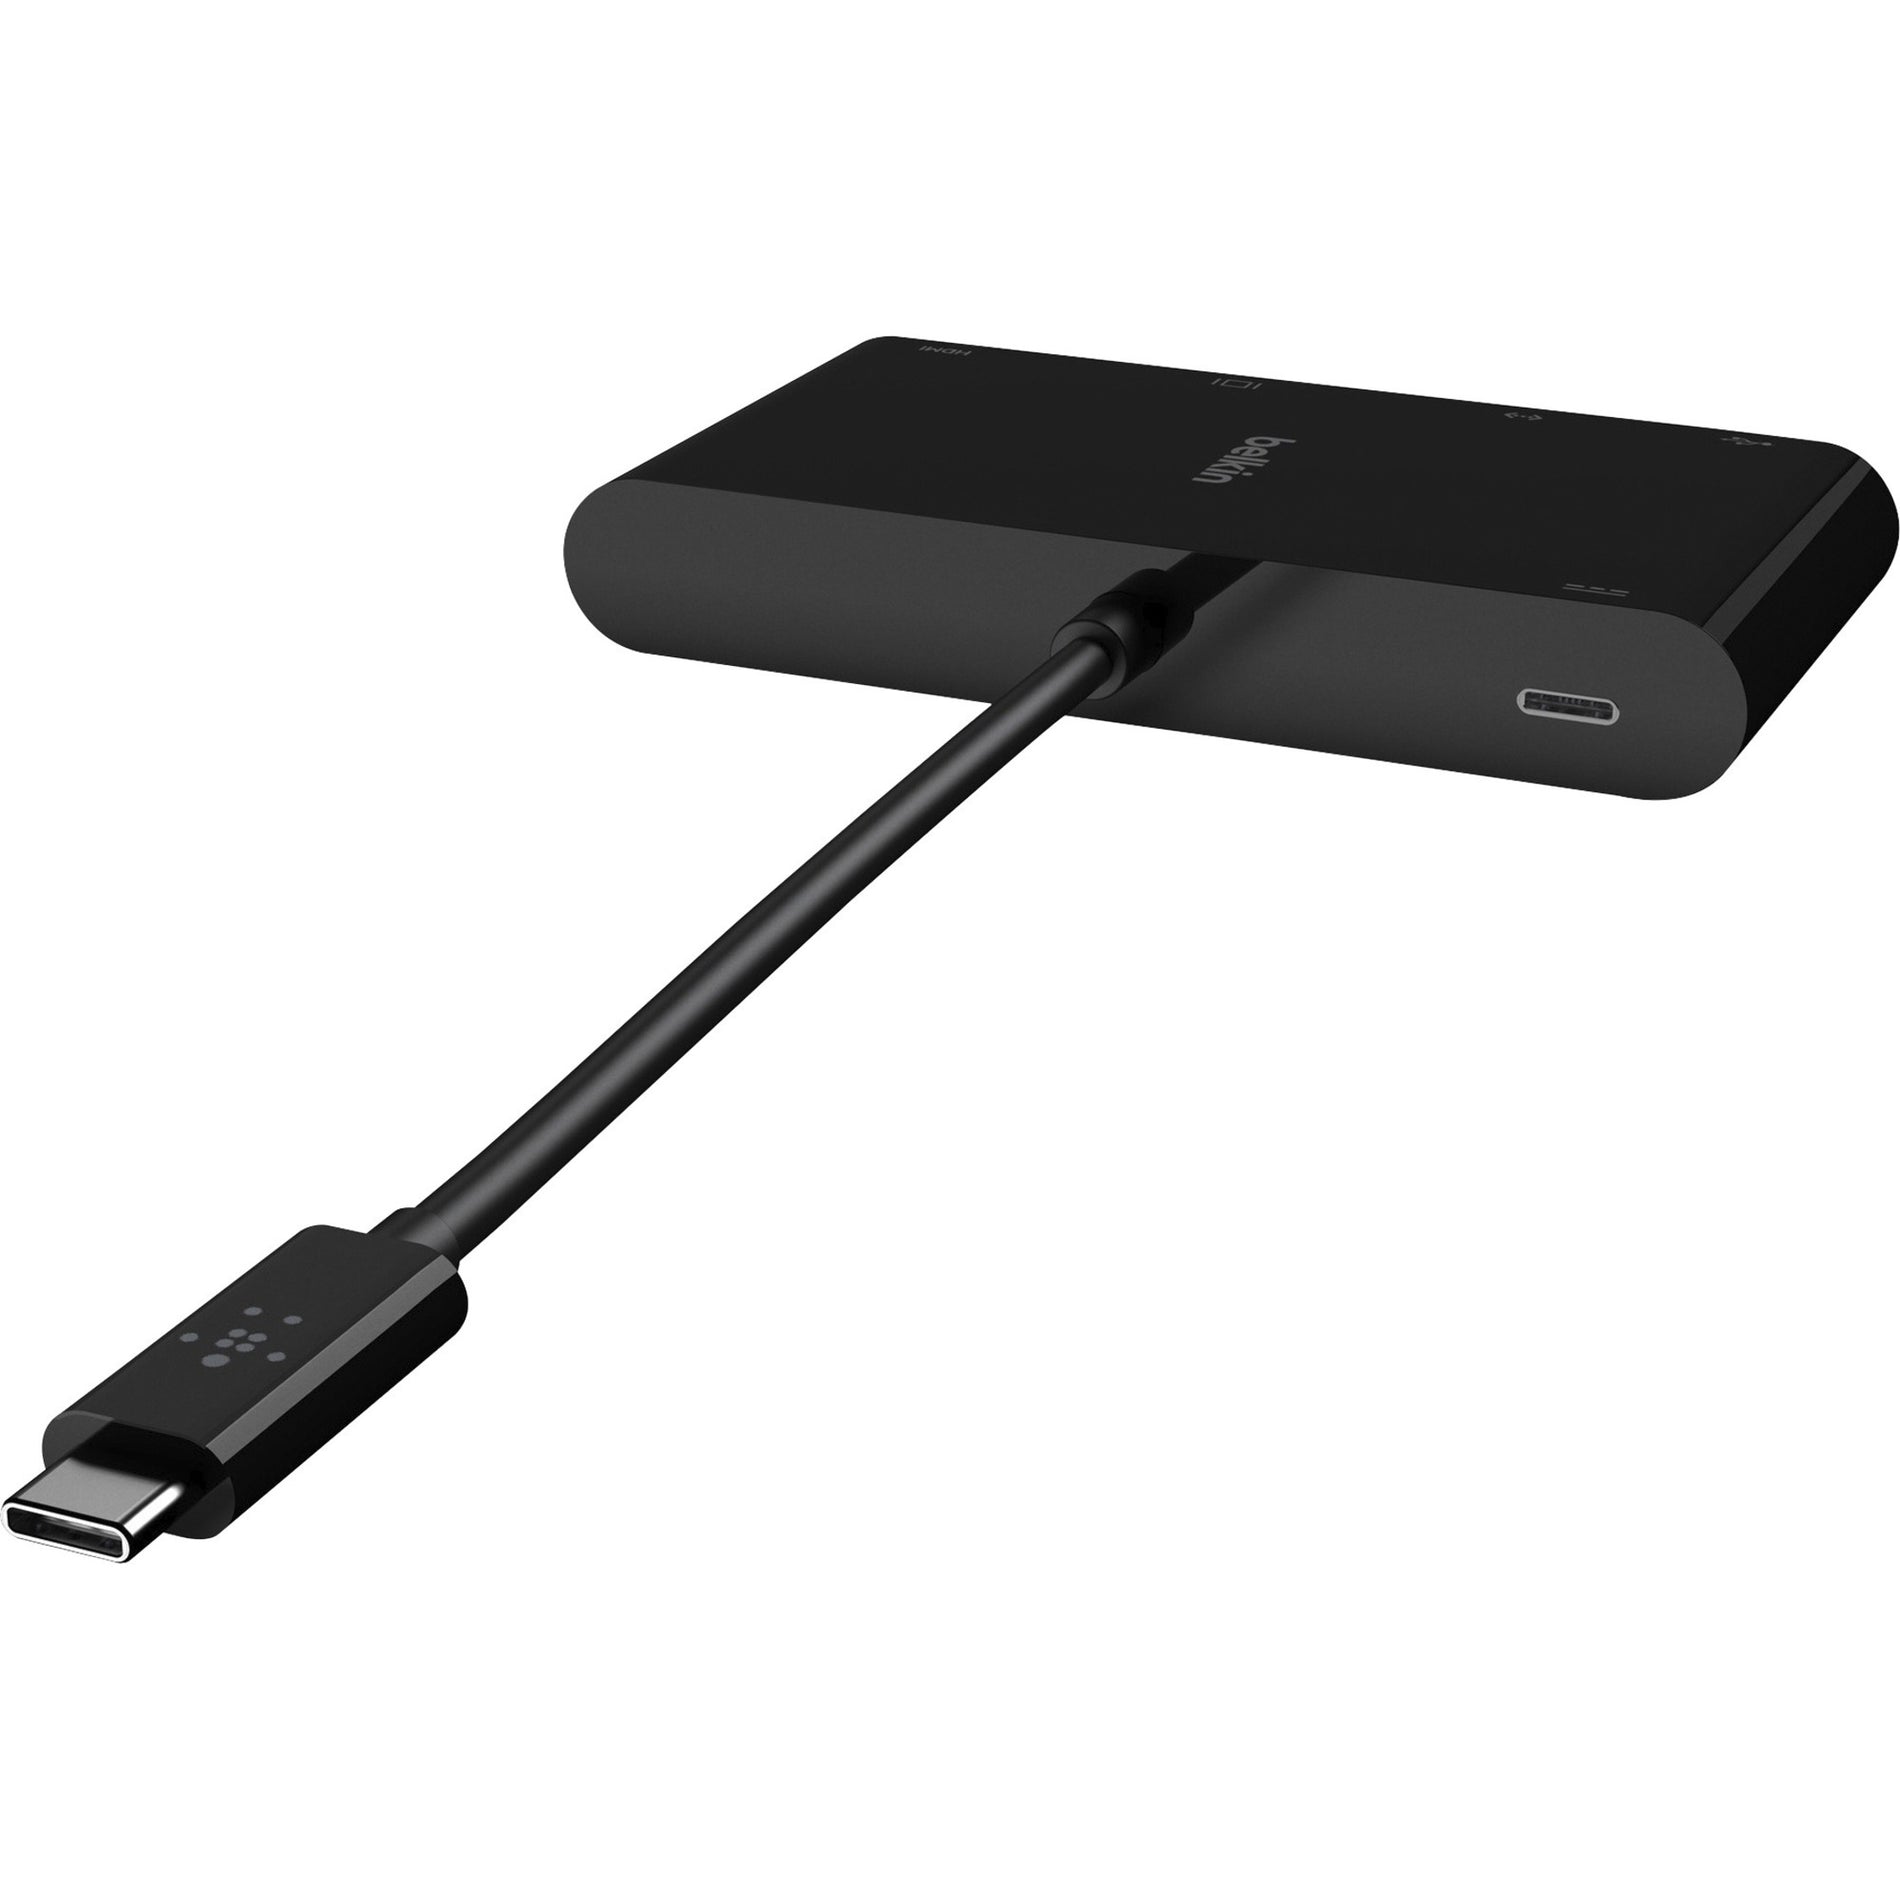 Belkin AVC004BK-BL USB-C Multimedia + Charge Adapter, USB-C to HDMI, USB A 3.0, VGA, up to 100W Power Delivery, up 4k Resolution